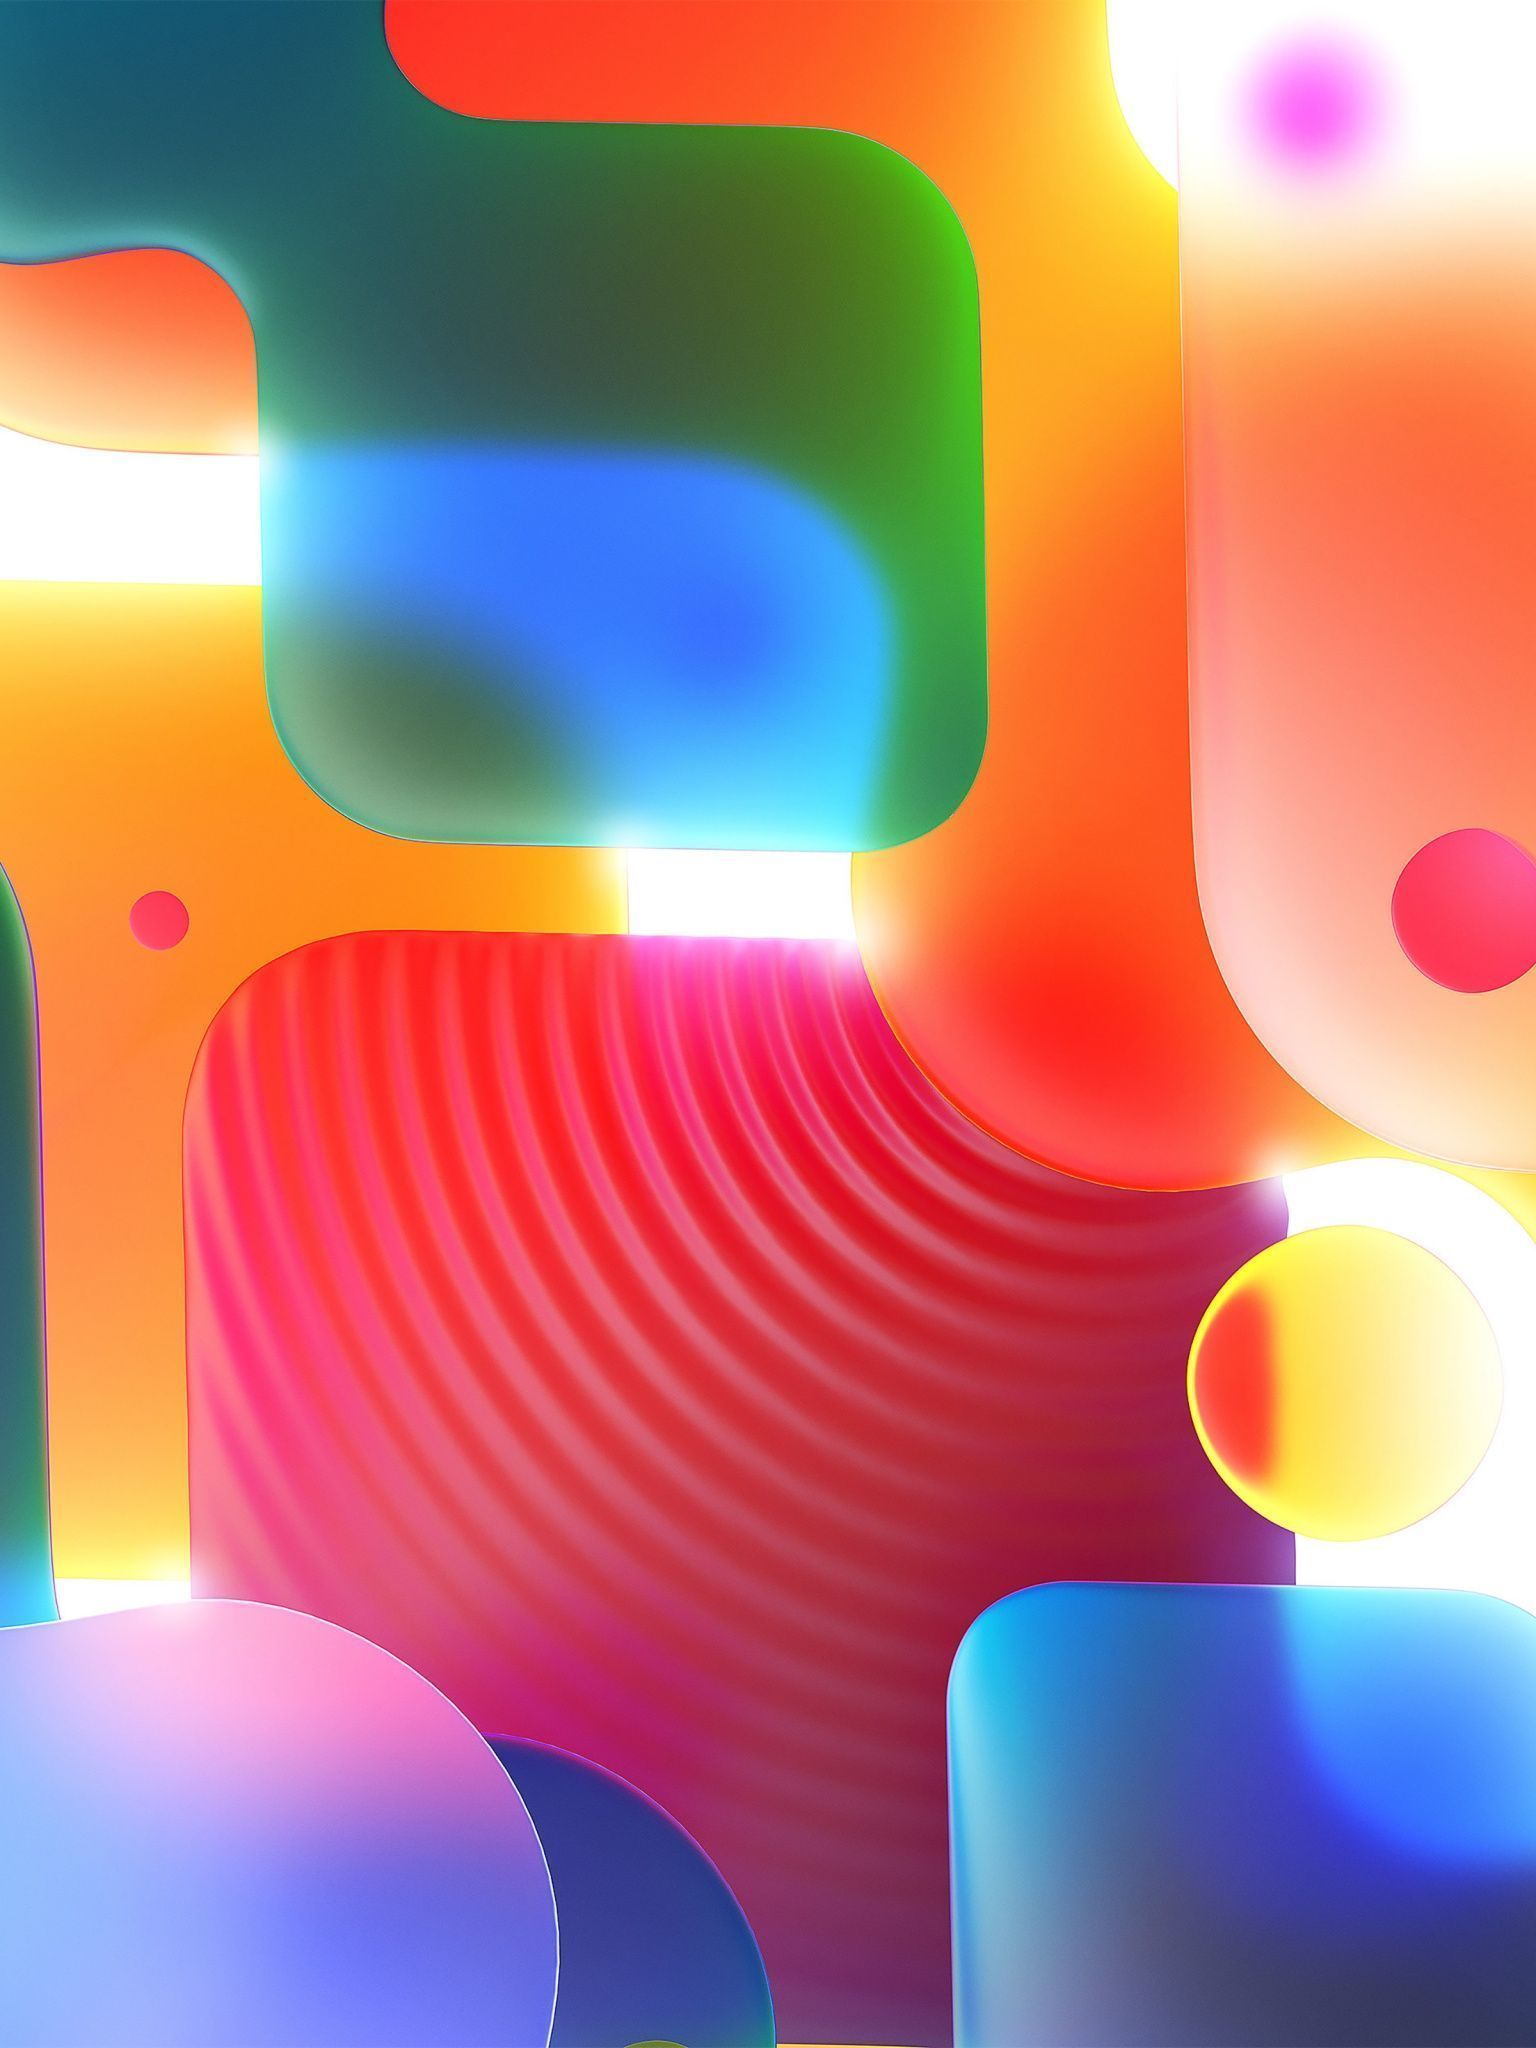 Shapes Wallpaper 4K, Colorful, 3D, Gradients, Abstract